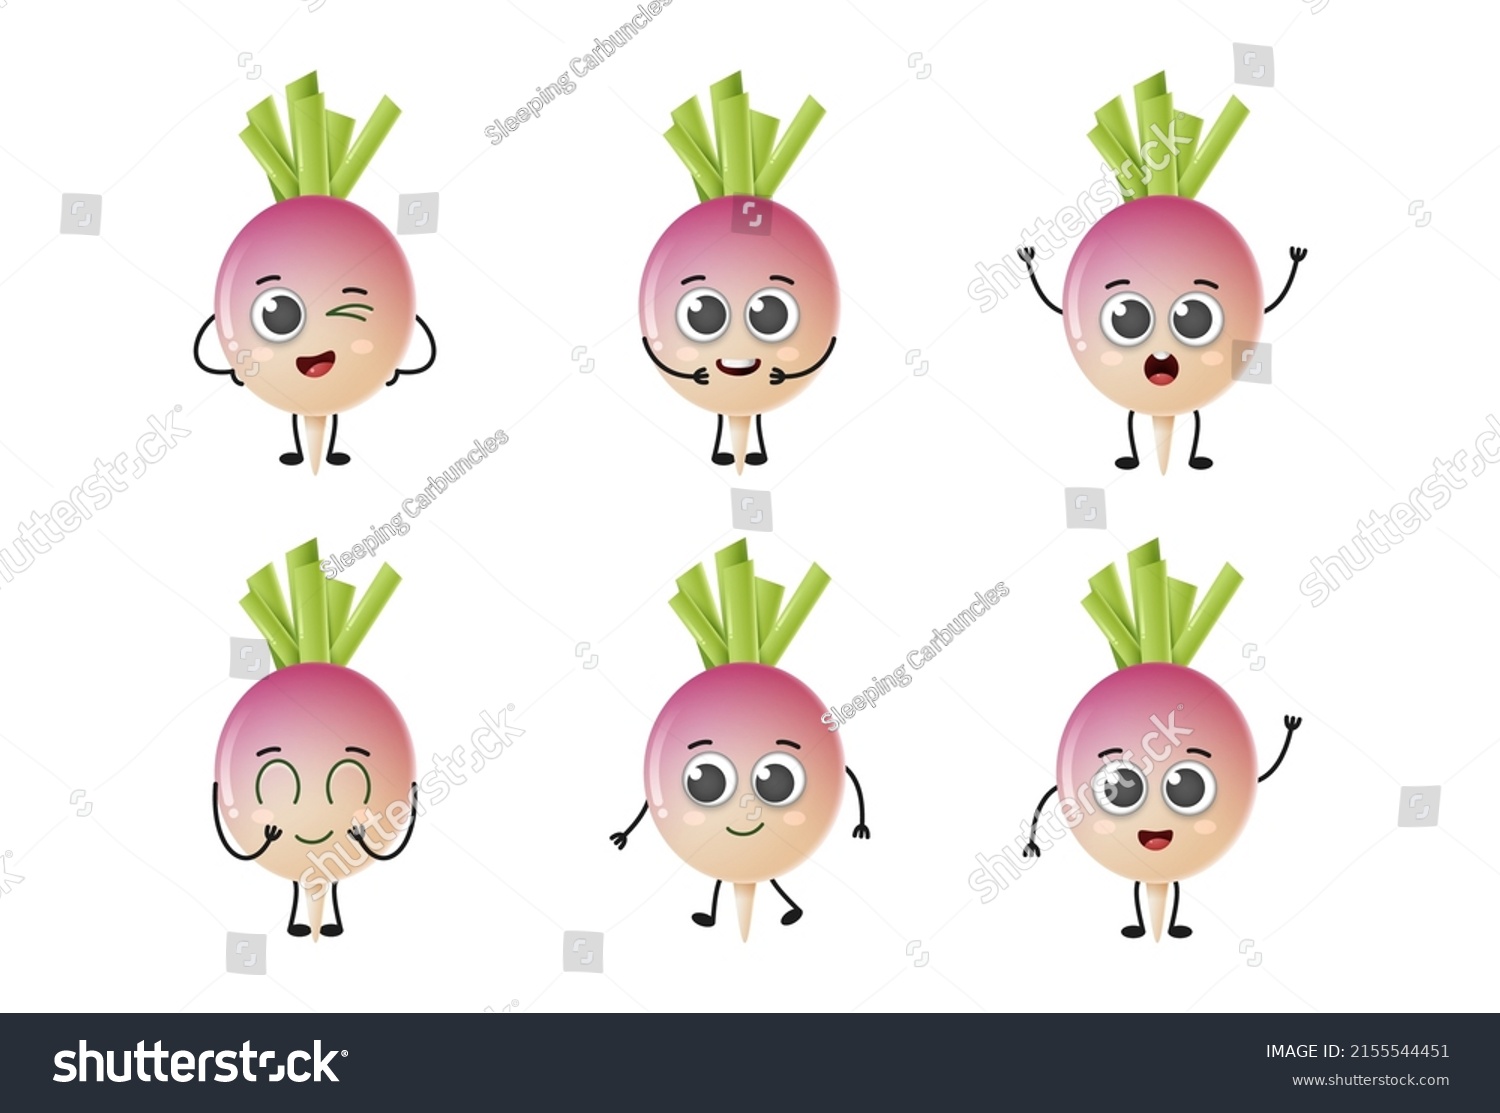 Set of cute cartoon turnip vegetables vector character set isolated on white background #2155544451